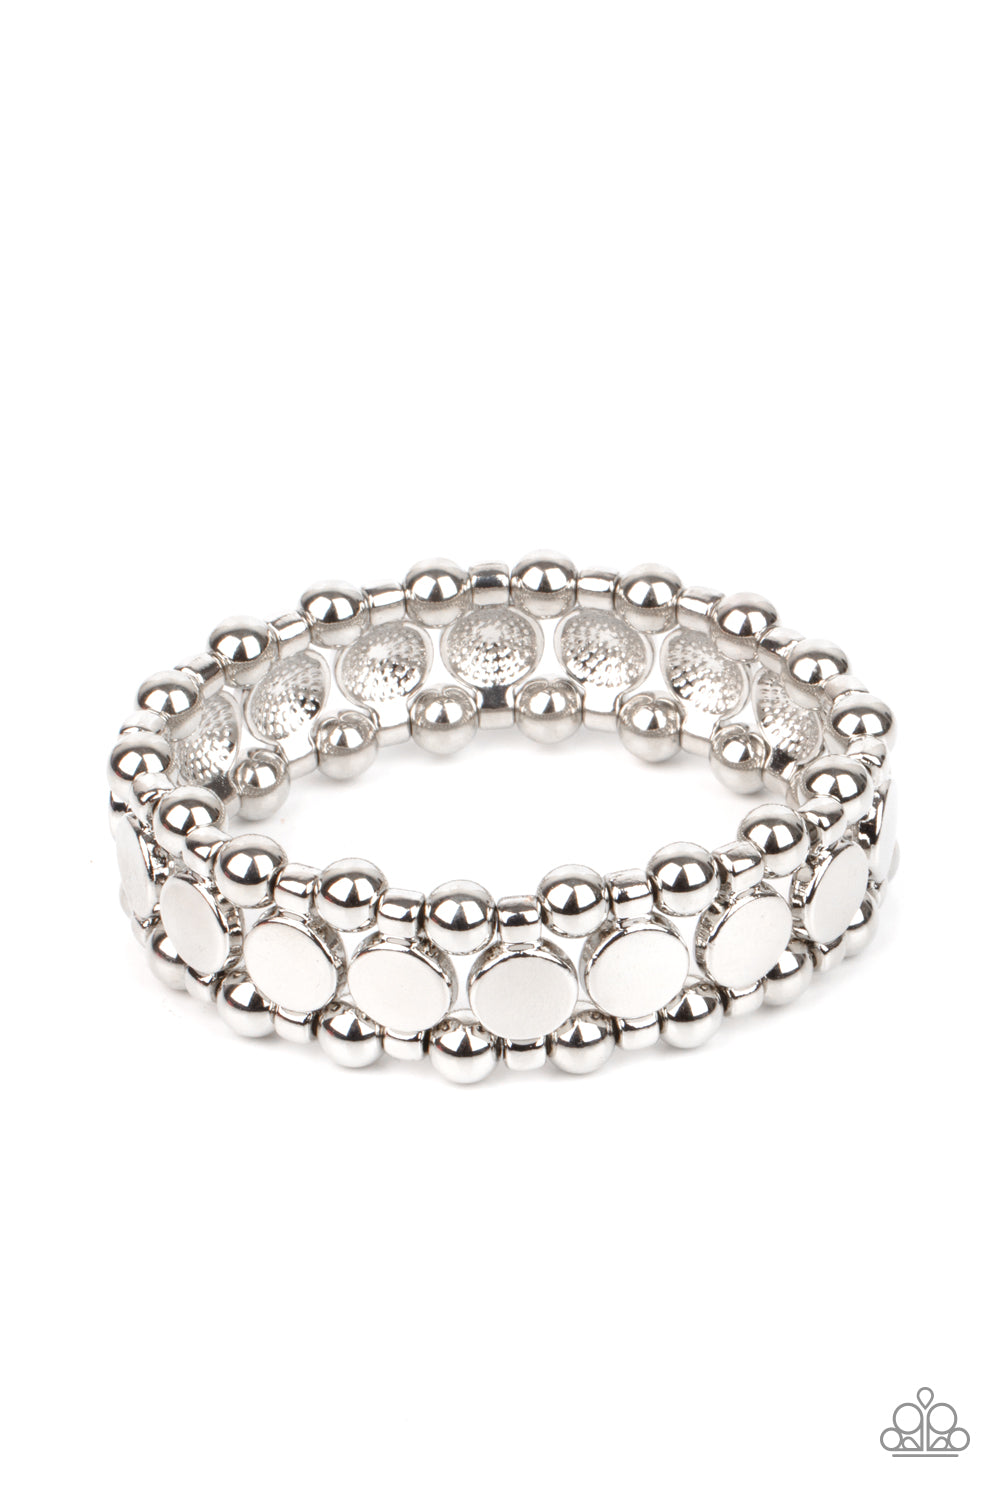 Metro Magnetism Silver Bracelet - Paparazzi Accessories  Shiny silver disc fittings and pairs of classic silver beads are threaded along stretchy bands around the wrist that connect into a bold industrial display around the wrist.  All Paparazzi Accessories are lead free and nickel free!  Sold as one individual bracelet.